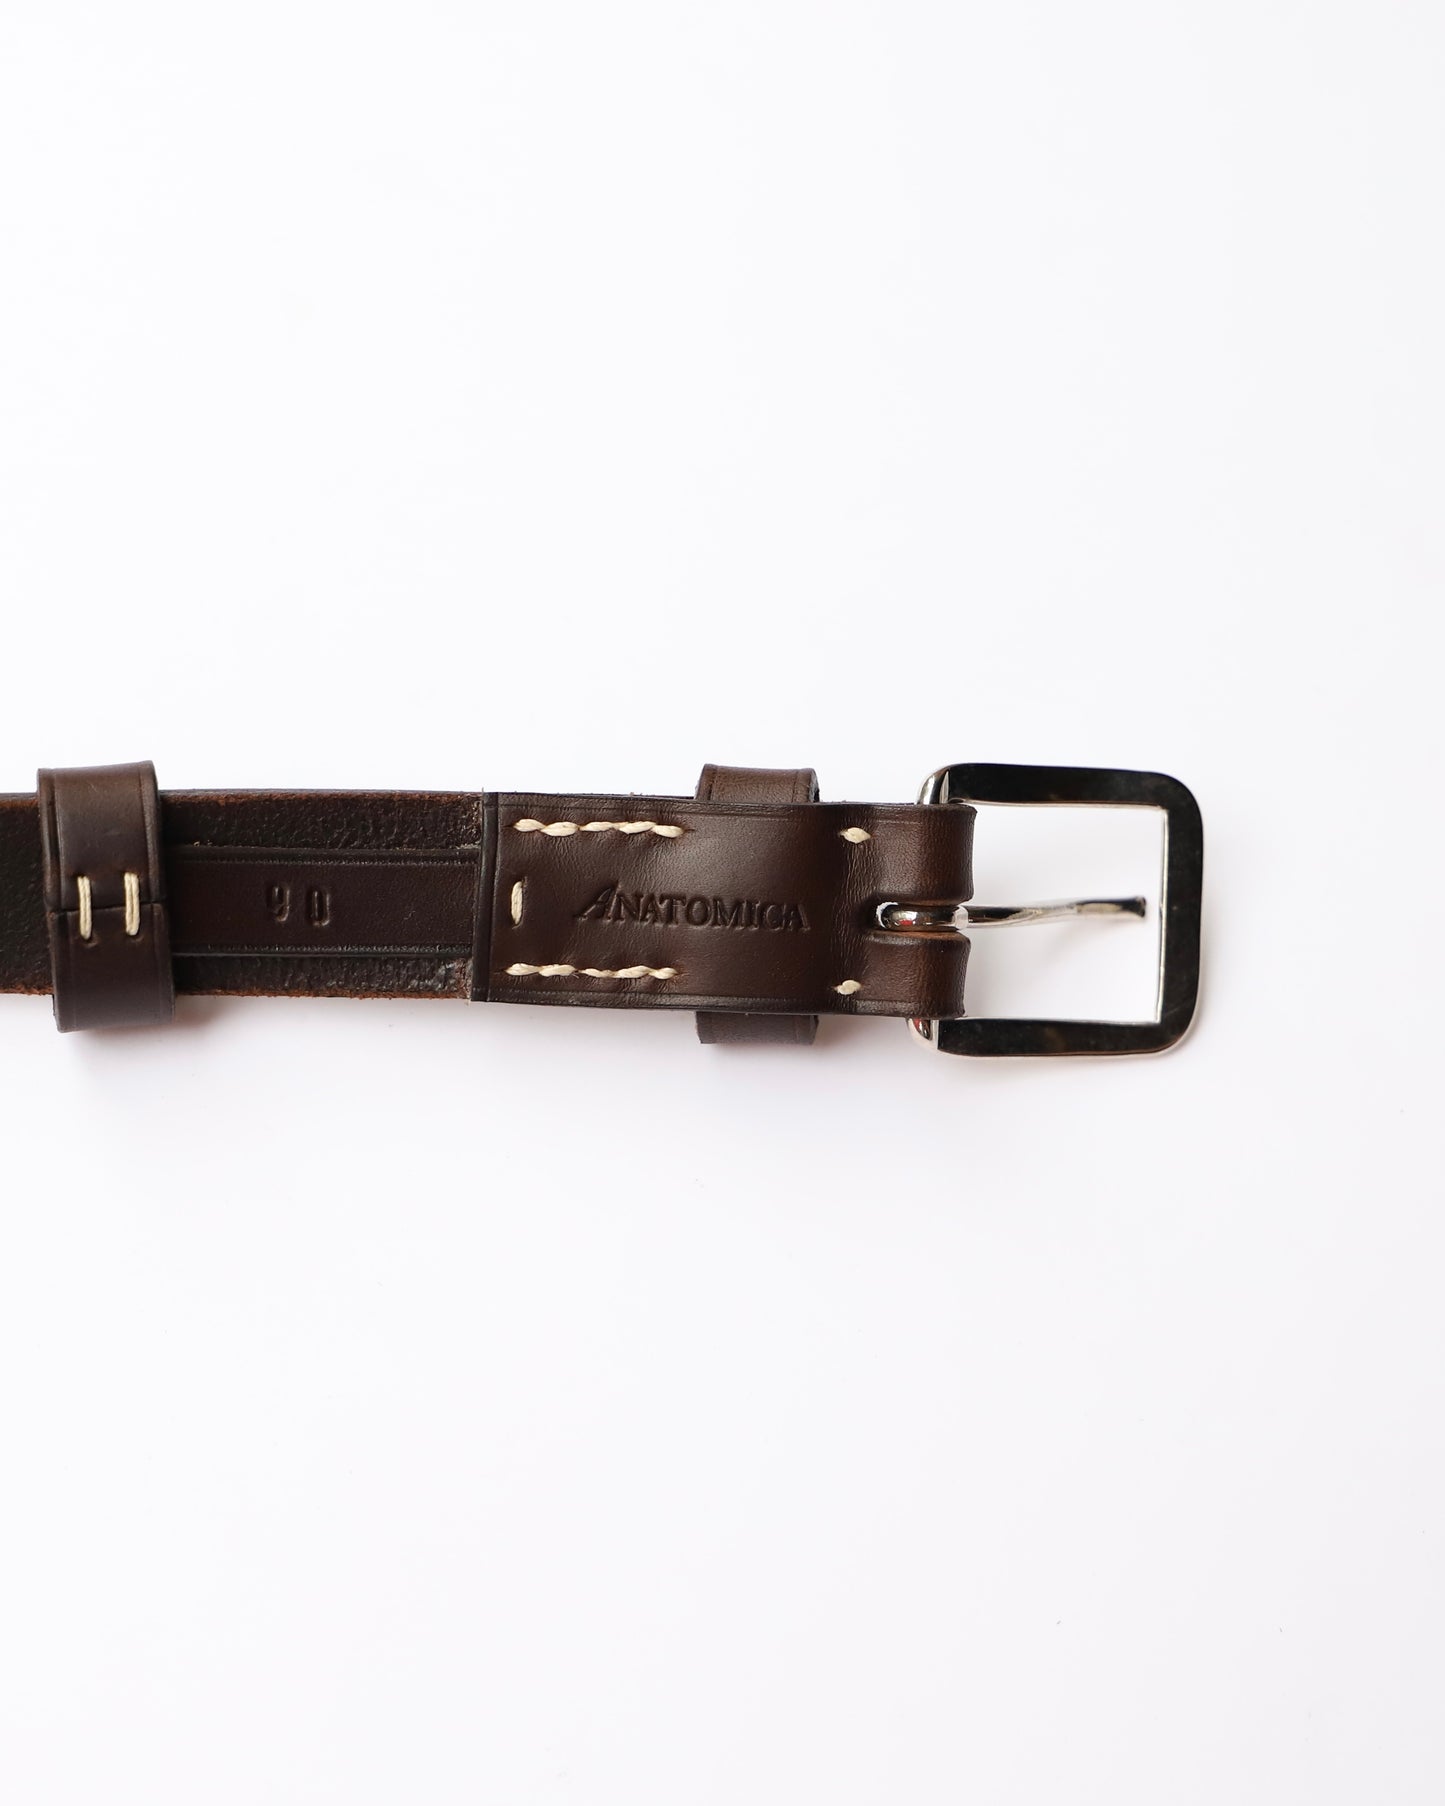 【 23FW 】ANATOMICA FRENCH ARMY LEATER BELT / BROWN